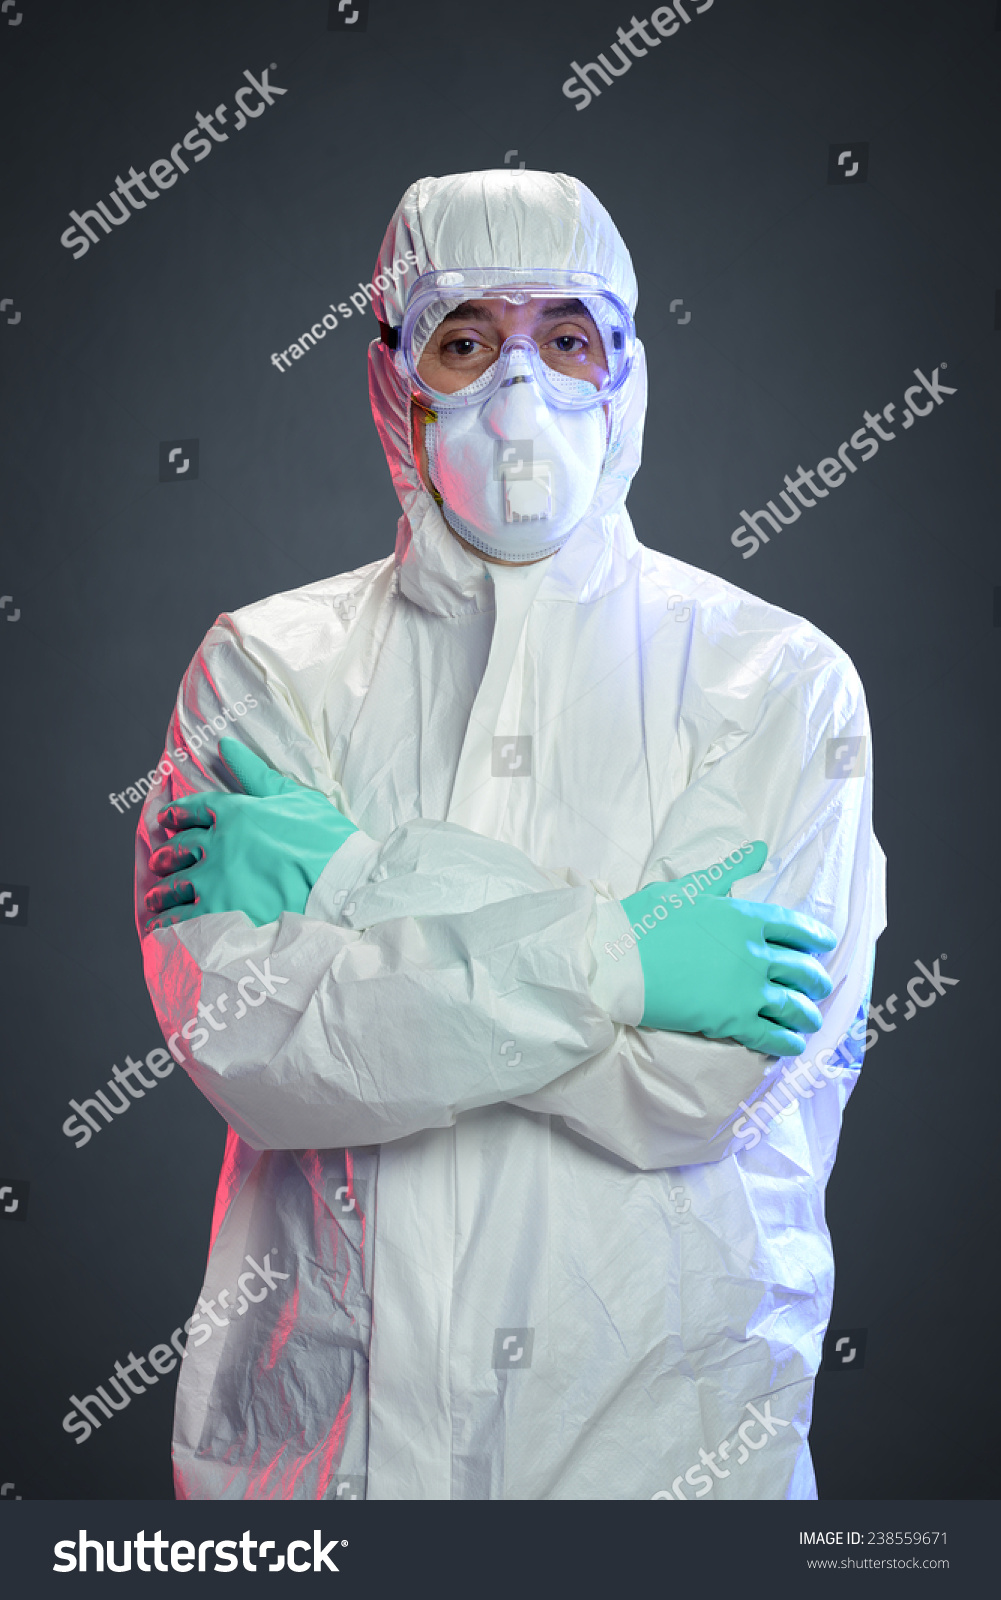 Scientist With Hazmat Suit Isolated On A Dark Background Stock Photo ...